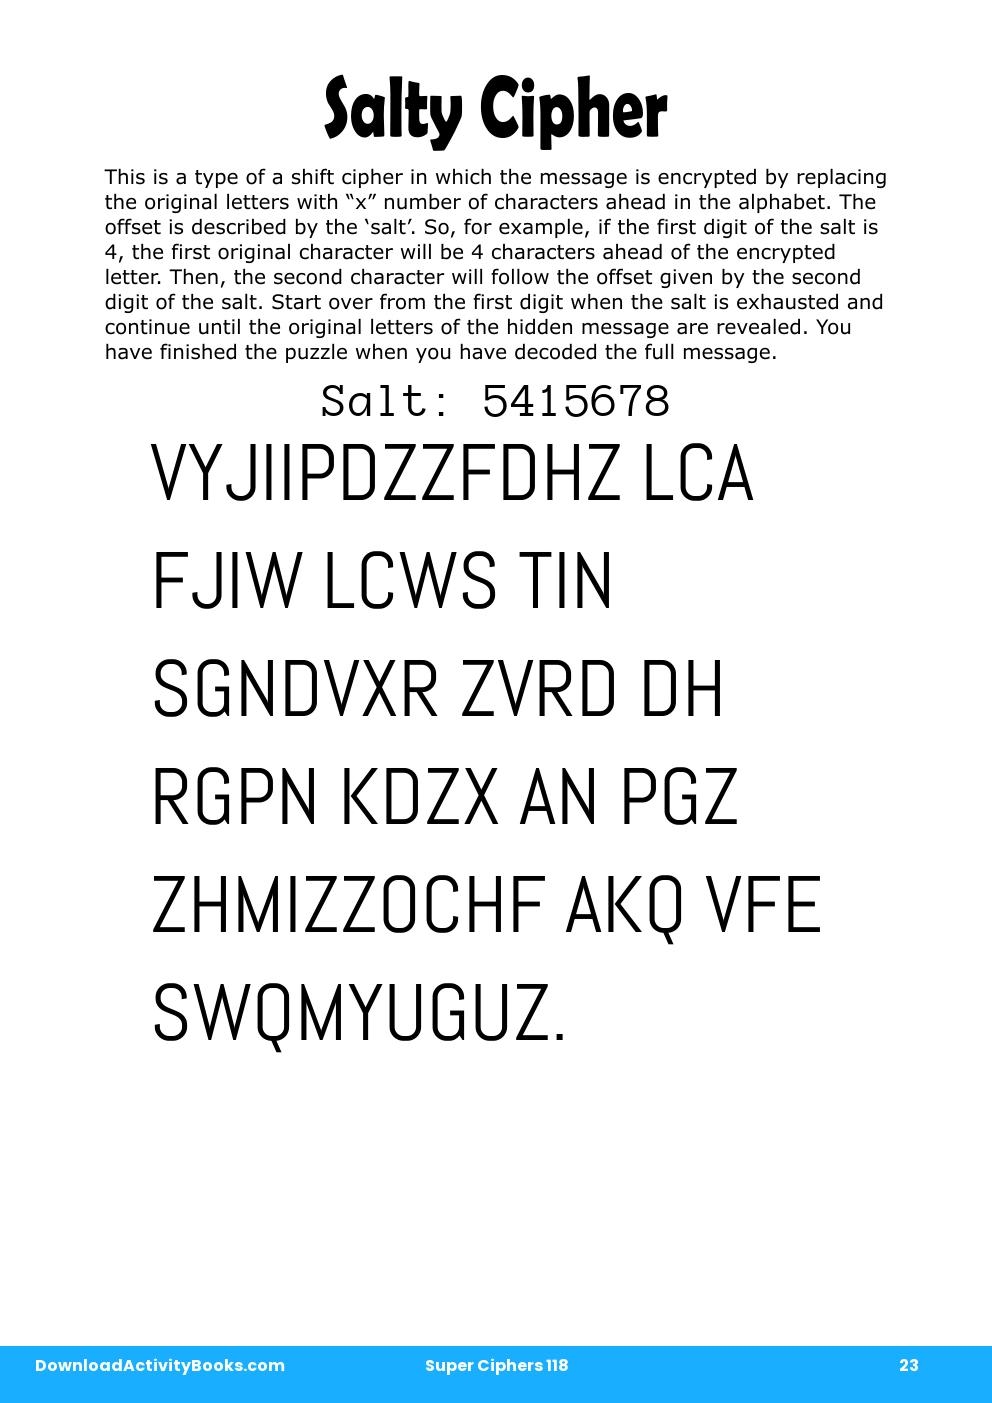 Salty Cipher in Super Ciphers 118